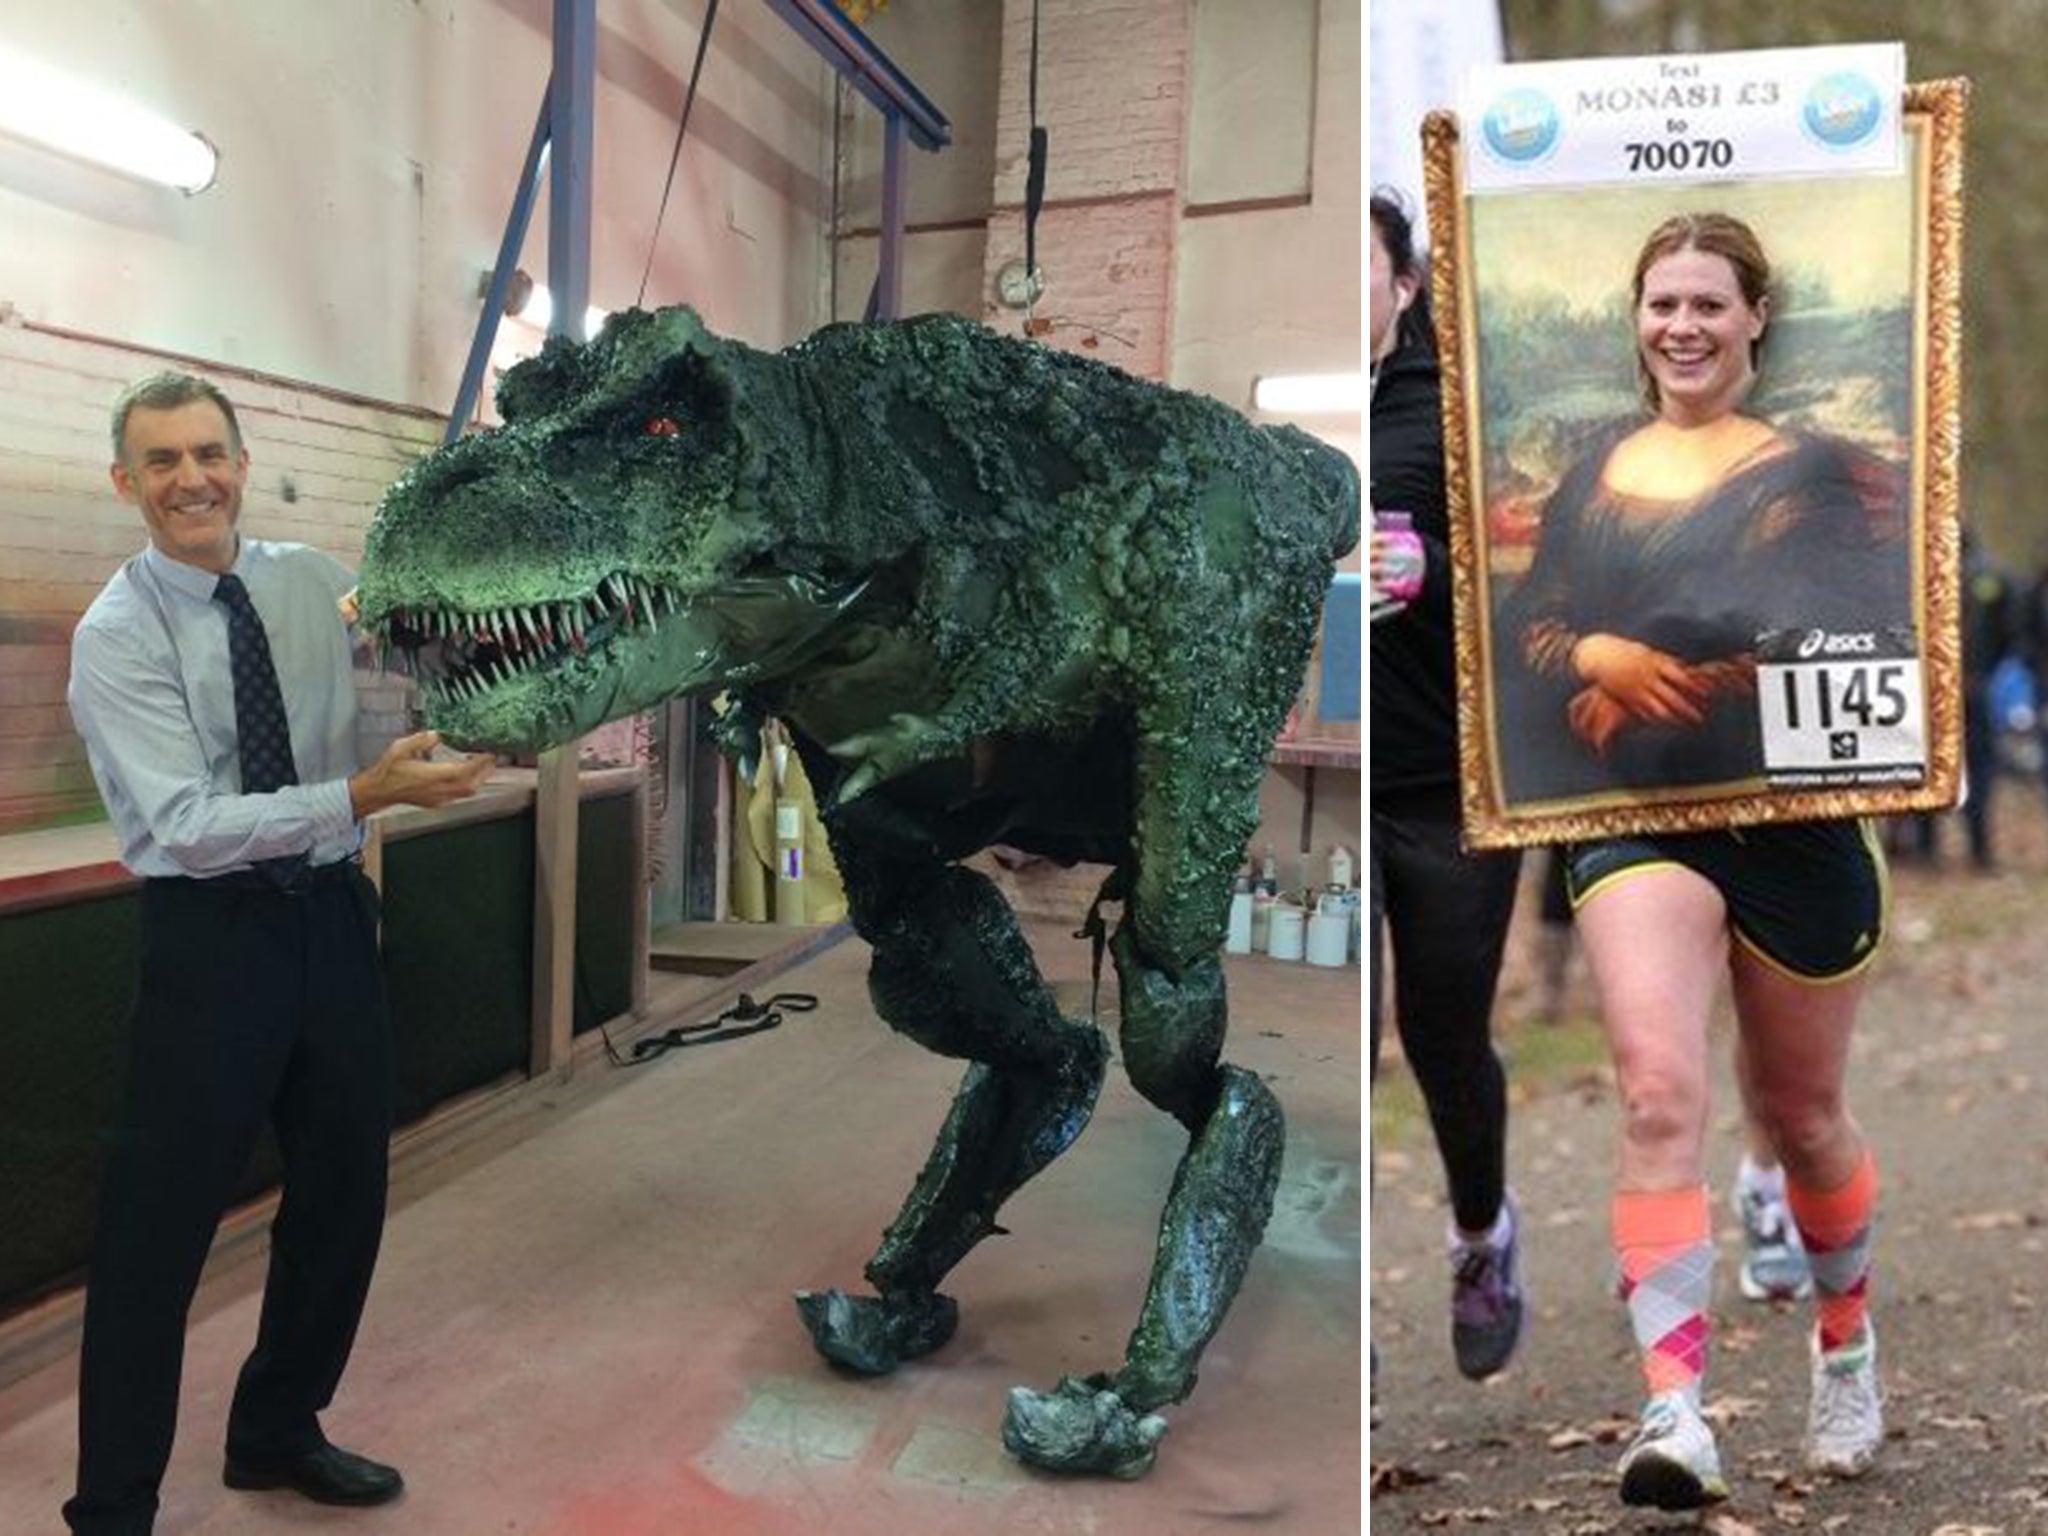 Ian Bates with the dinosaur costume in which he runs the Marathon, and Gemma Kirkham, who this year will be dressed as Mona Lisa